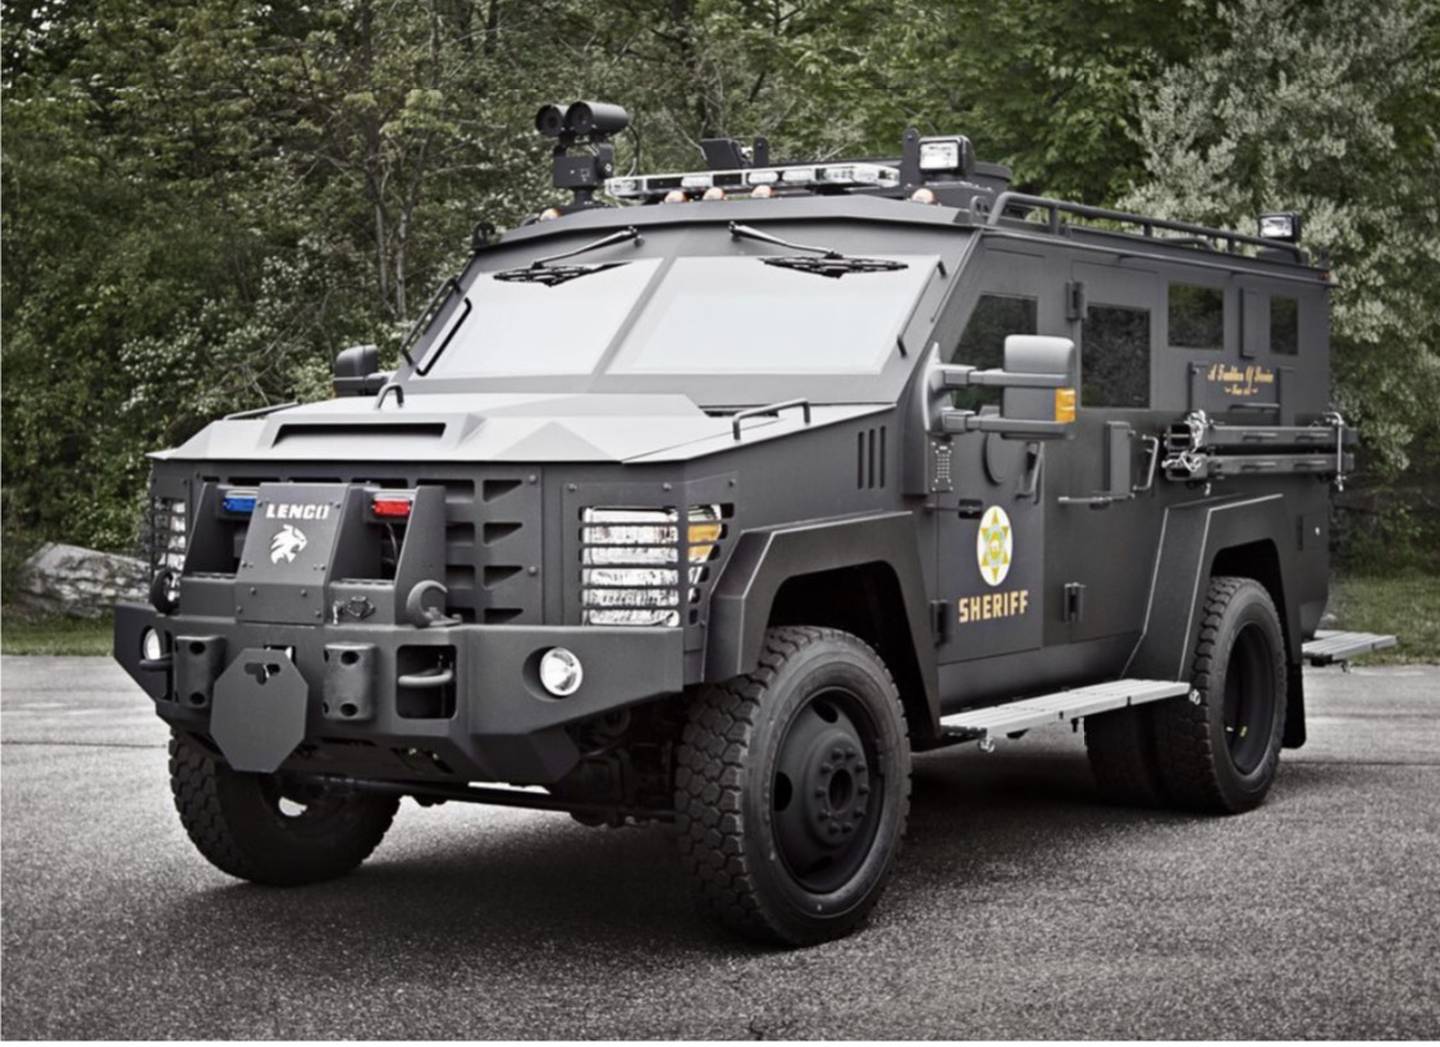 The Oswego Village Board has approved the purchase of a Lenco Bearcat G-2 armored truck from Lenco Armored Vehicles, above, for use by the village police department at a cost of $251,136. (Photo provided)